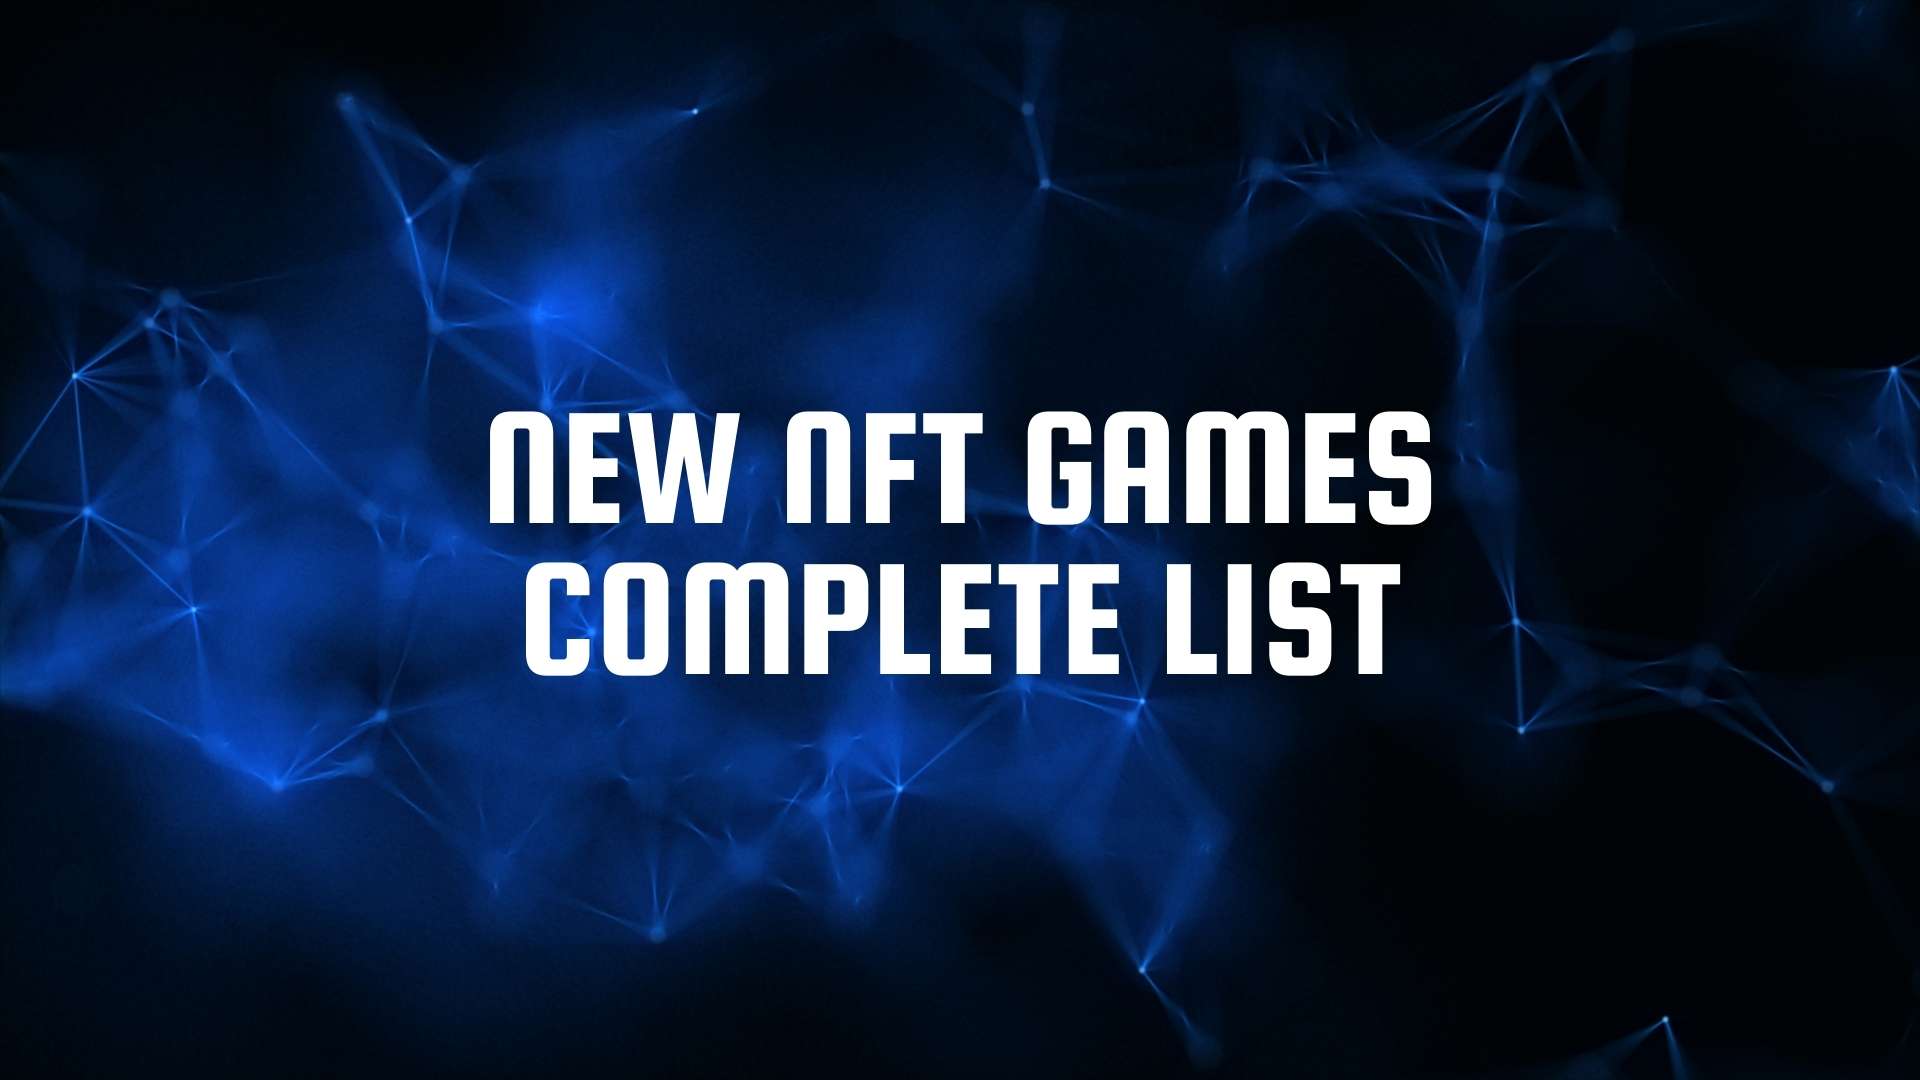 new NFT games complete list